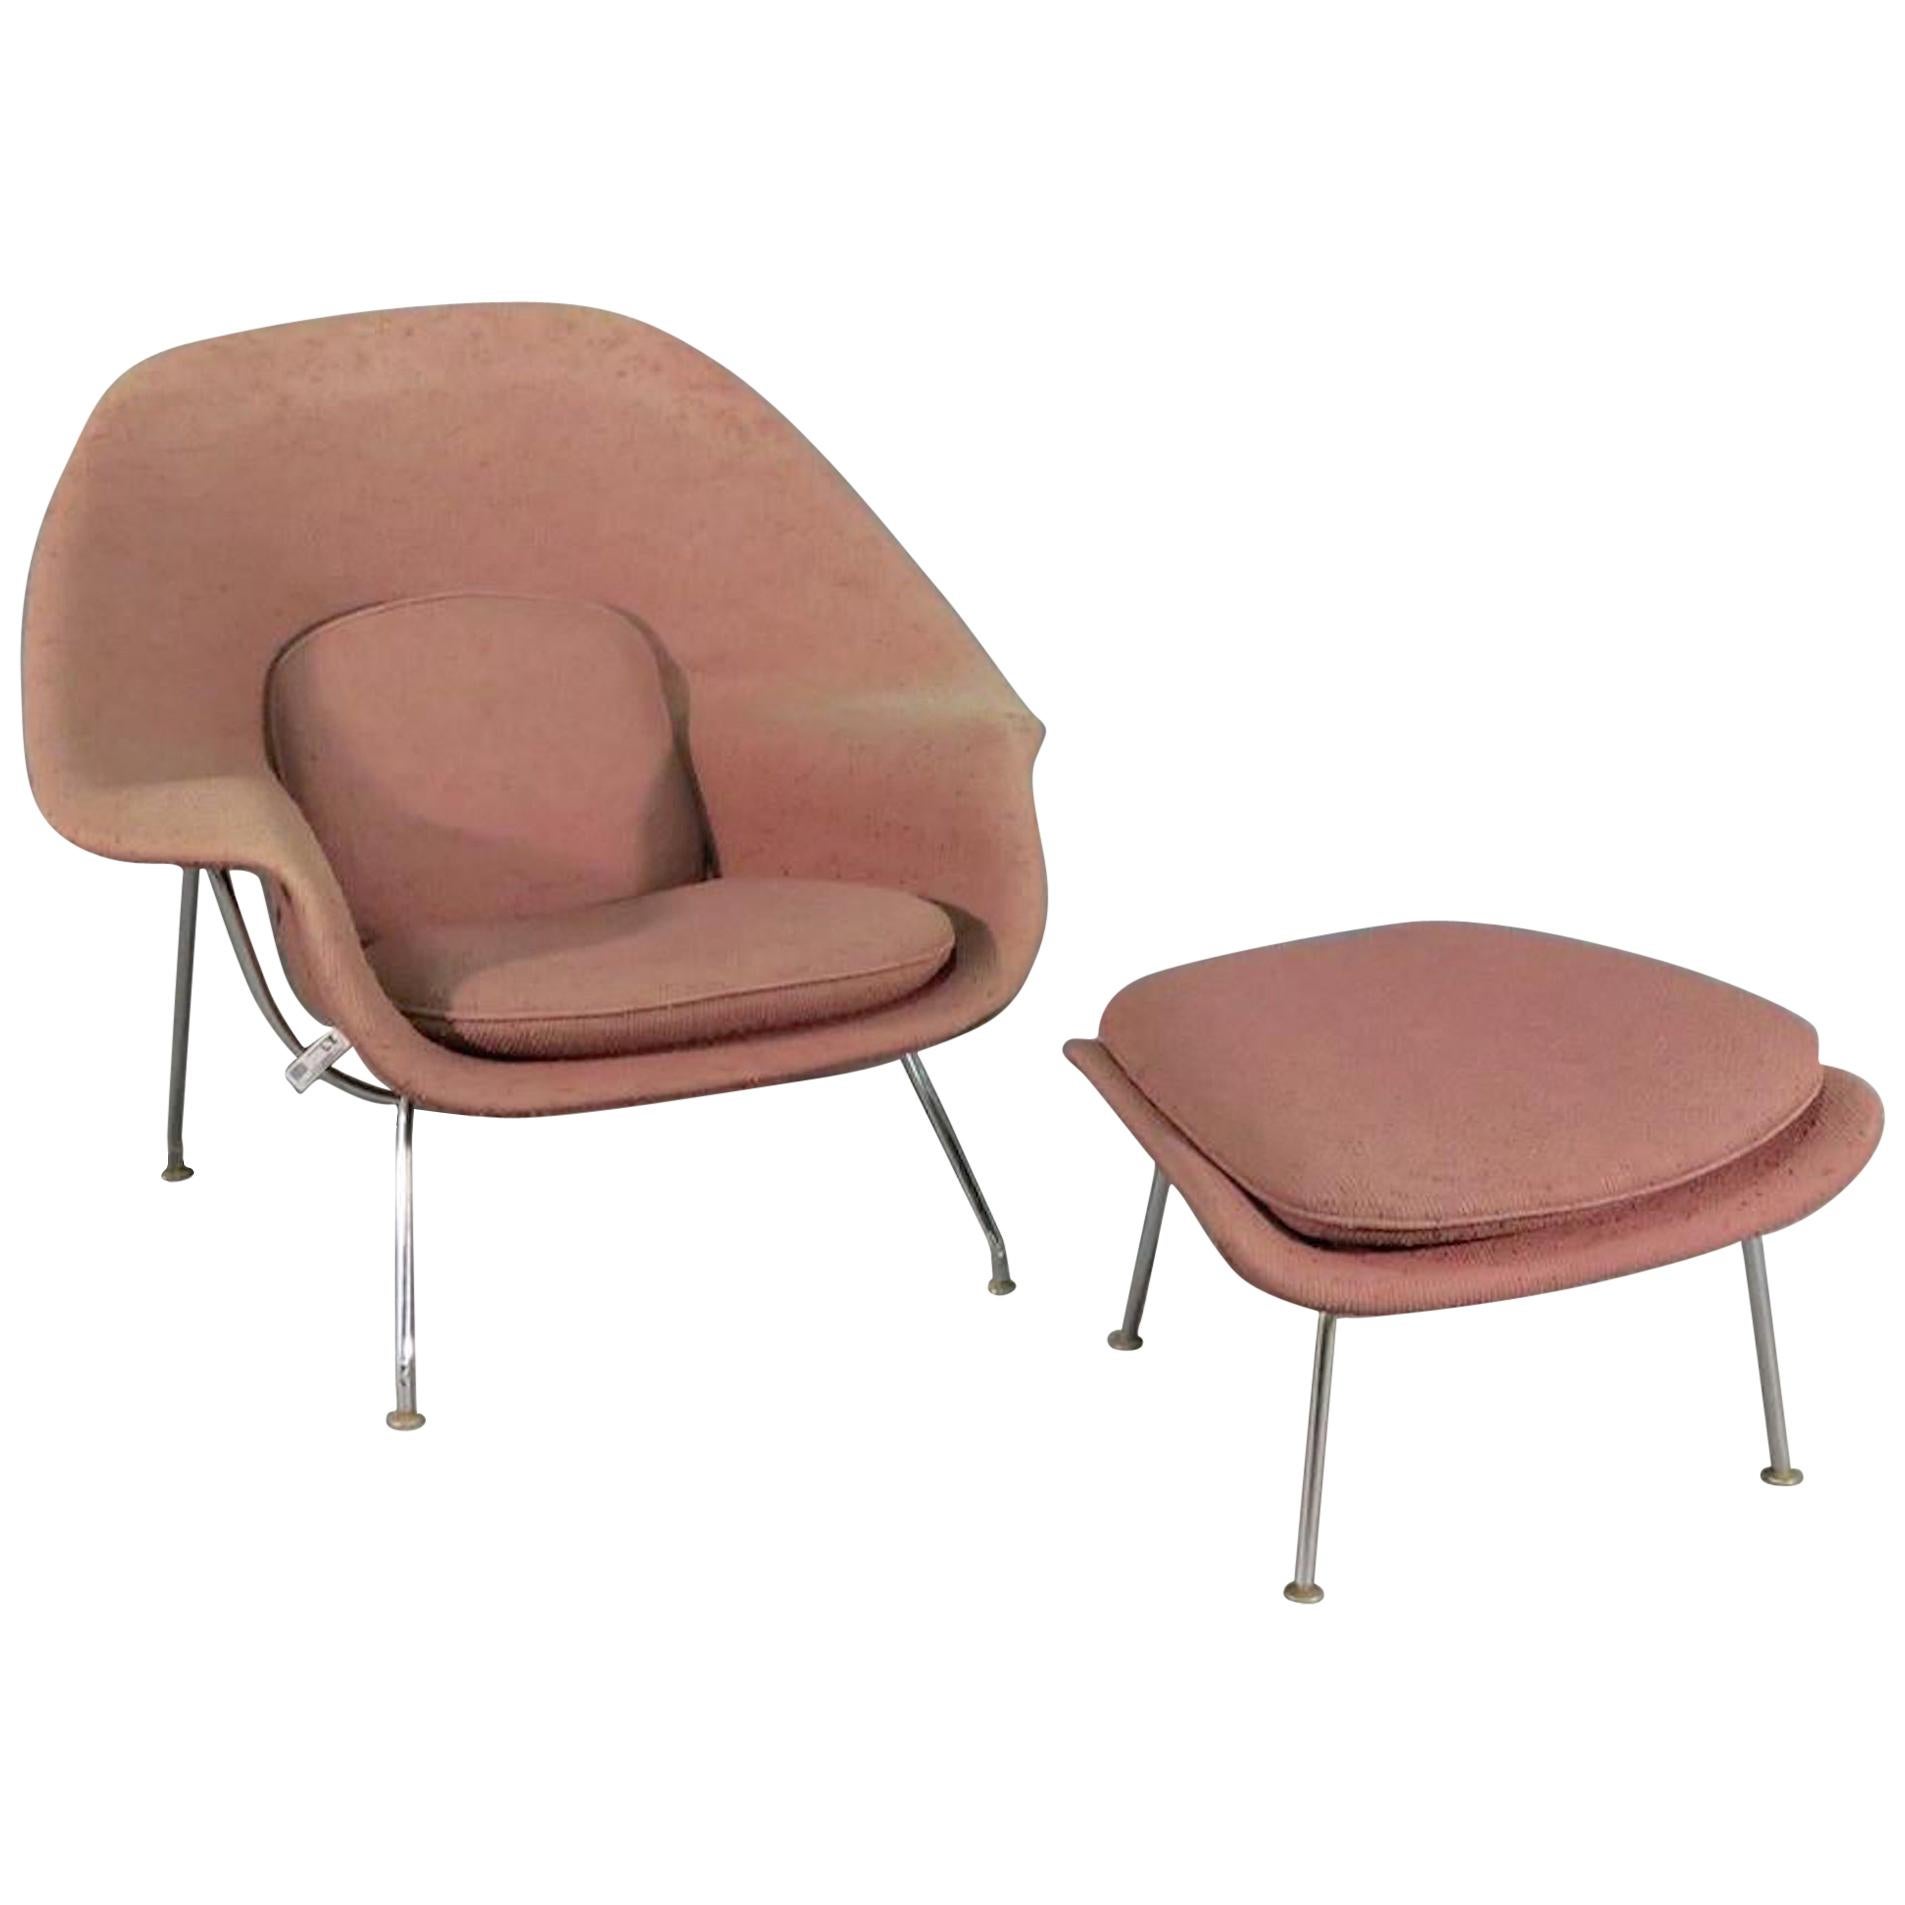 Mid-Century Modern Womb Chair by Knoll